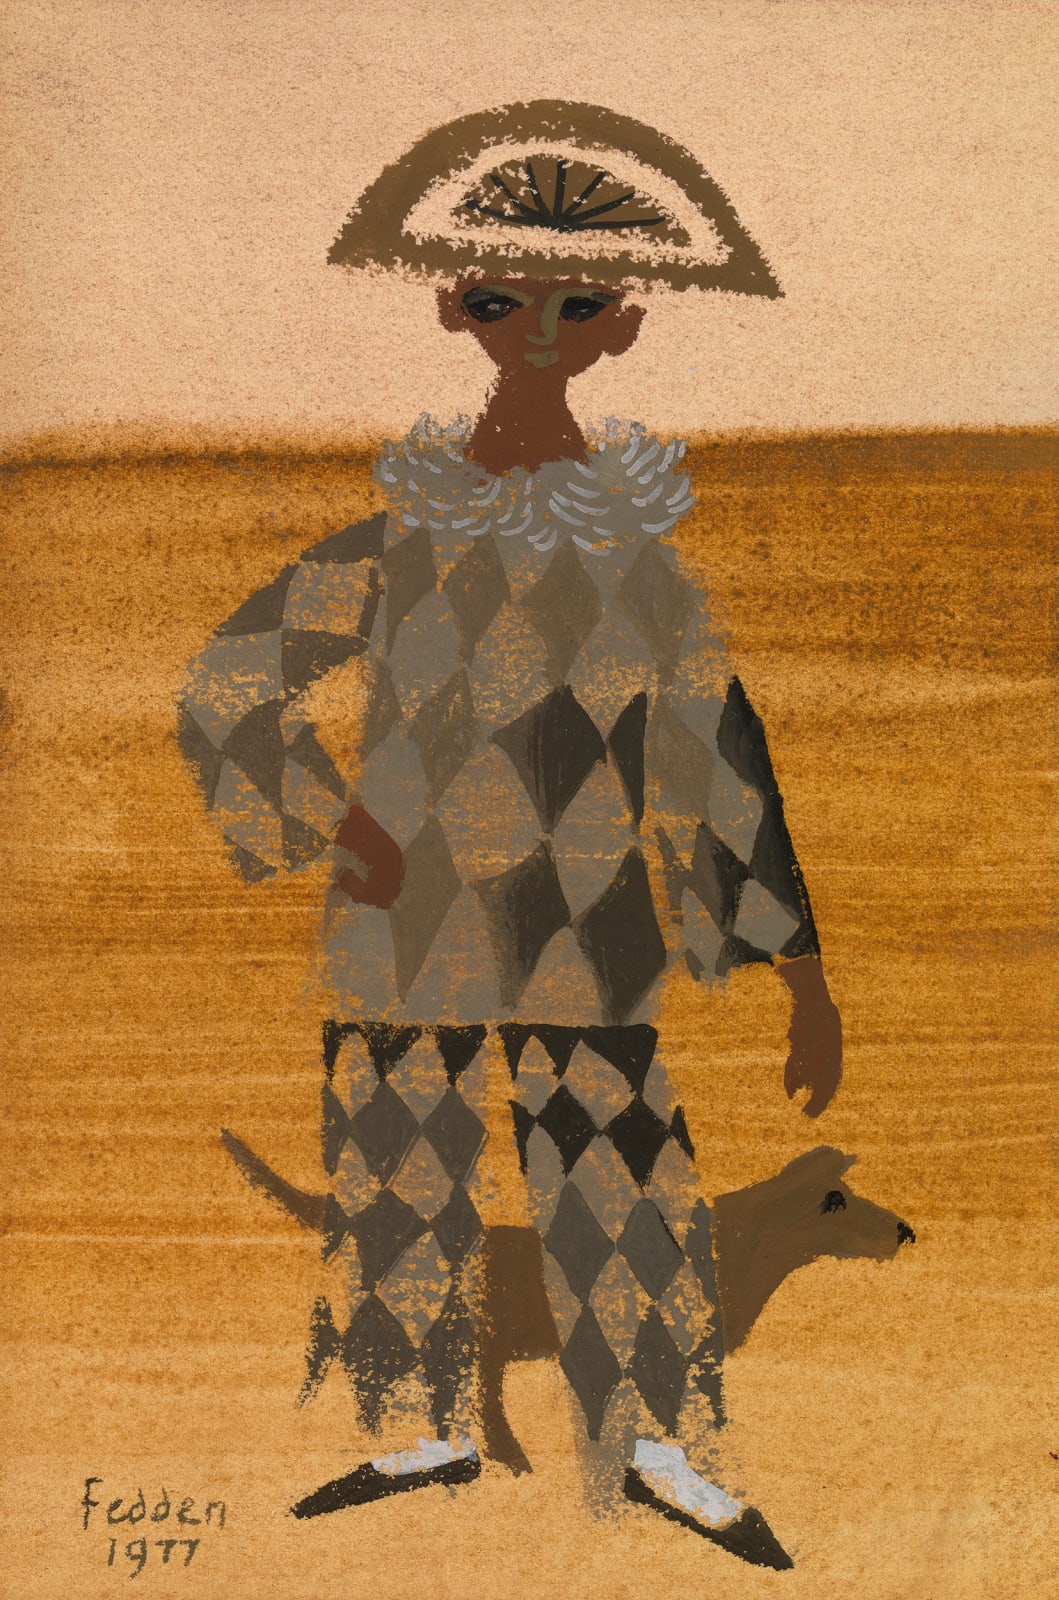 Mary Fedden, Harlequin with dog, 1977